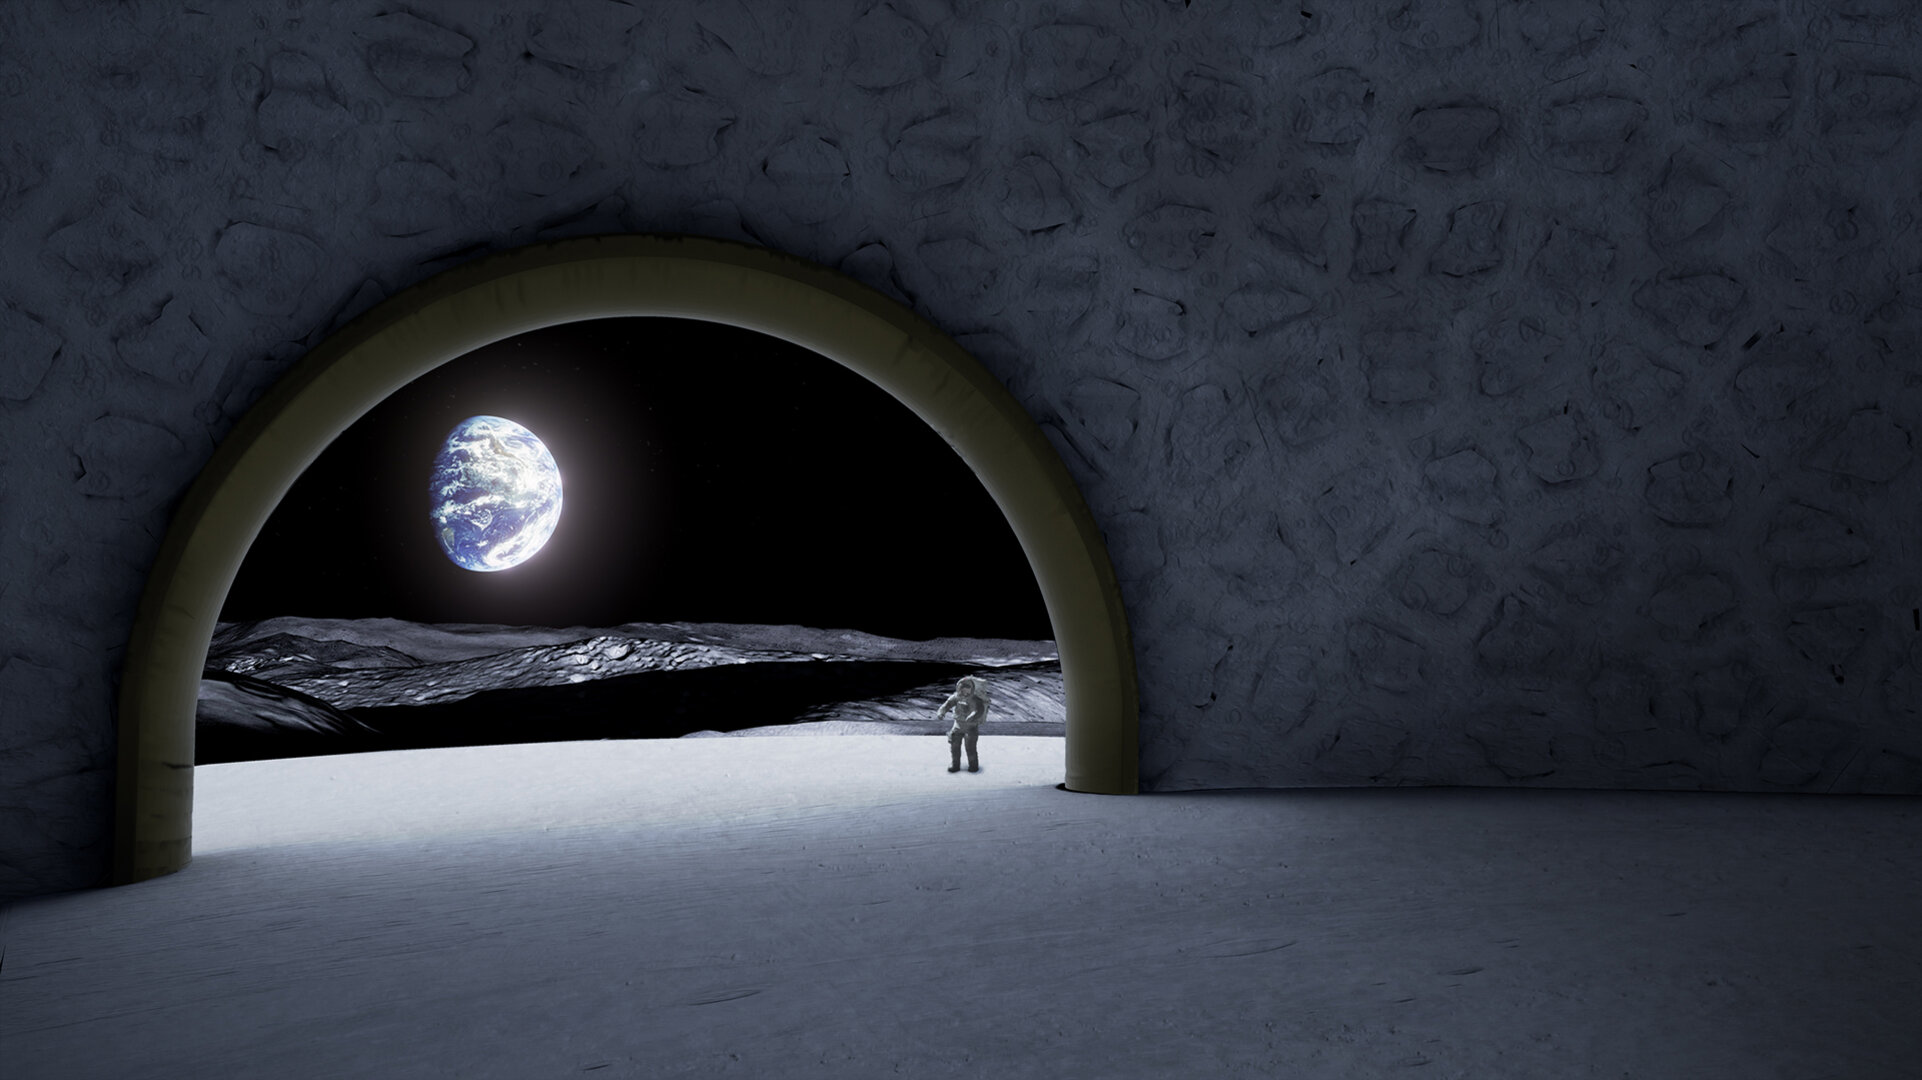 Here is an idea for a future building on the Moon